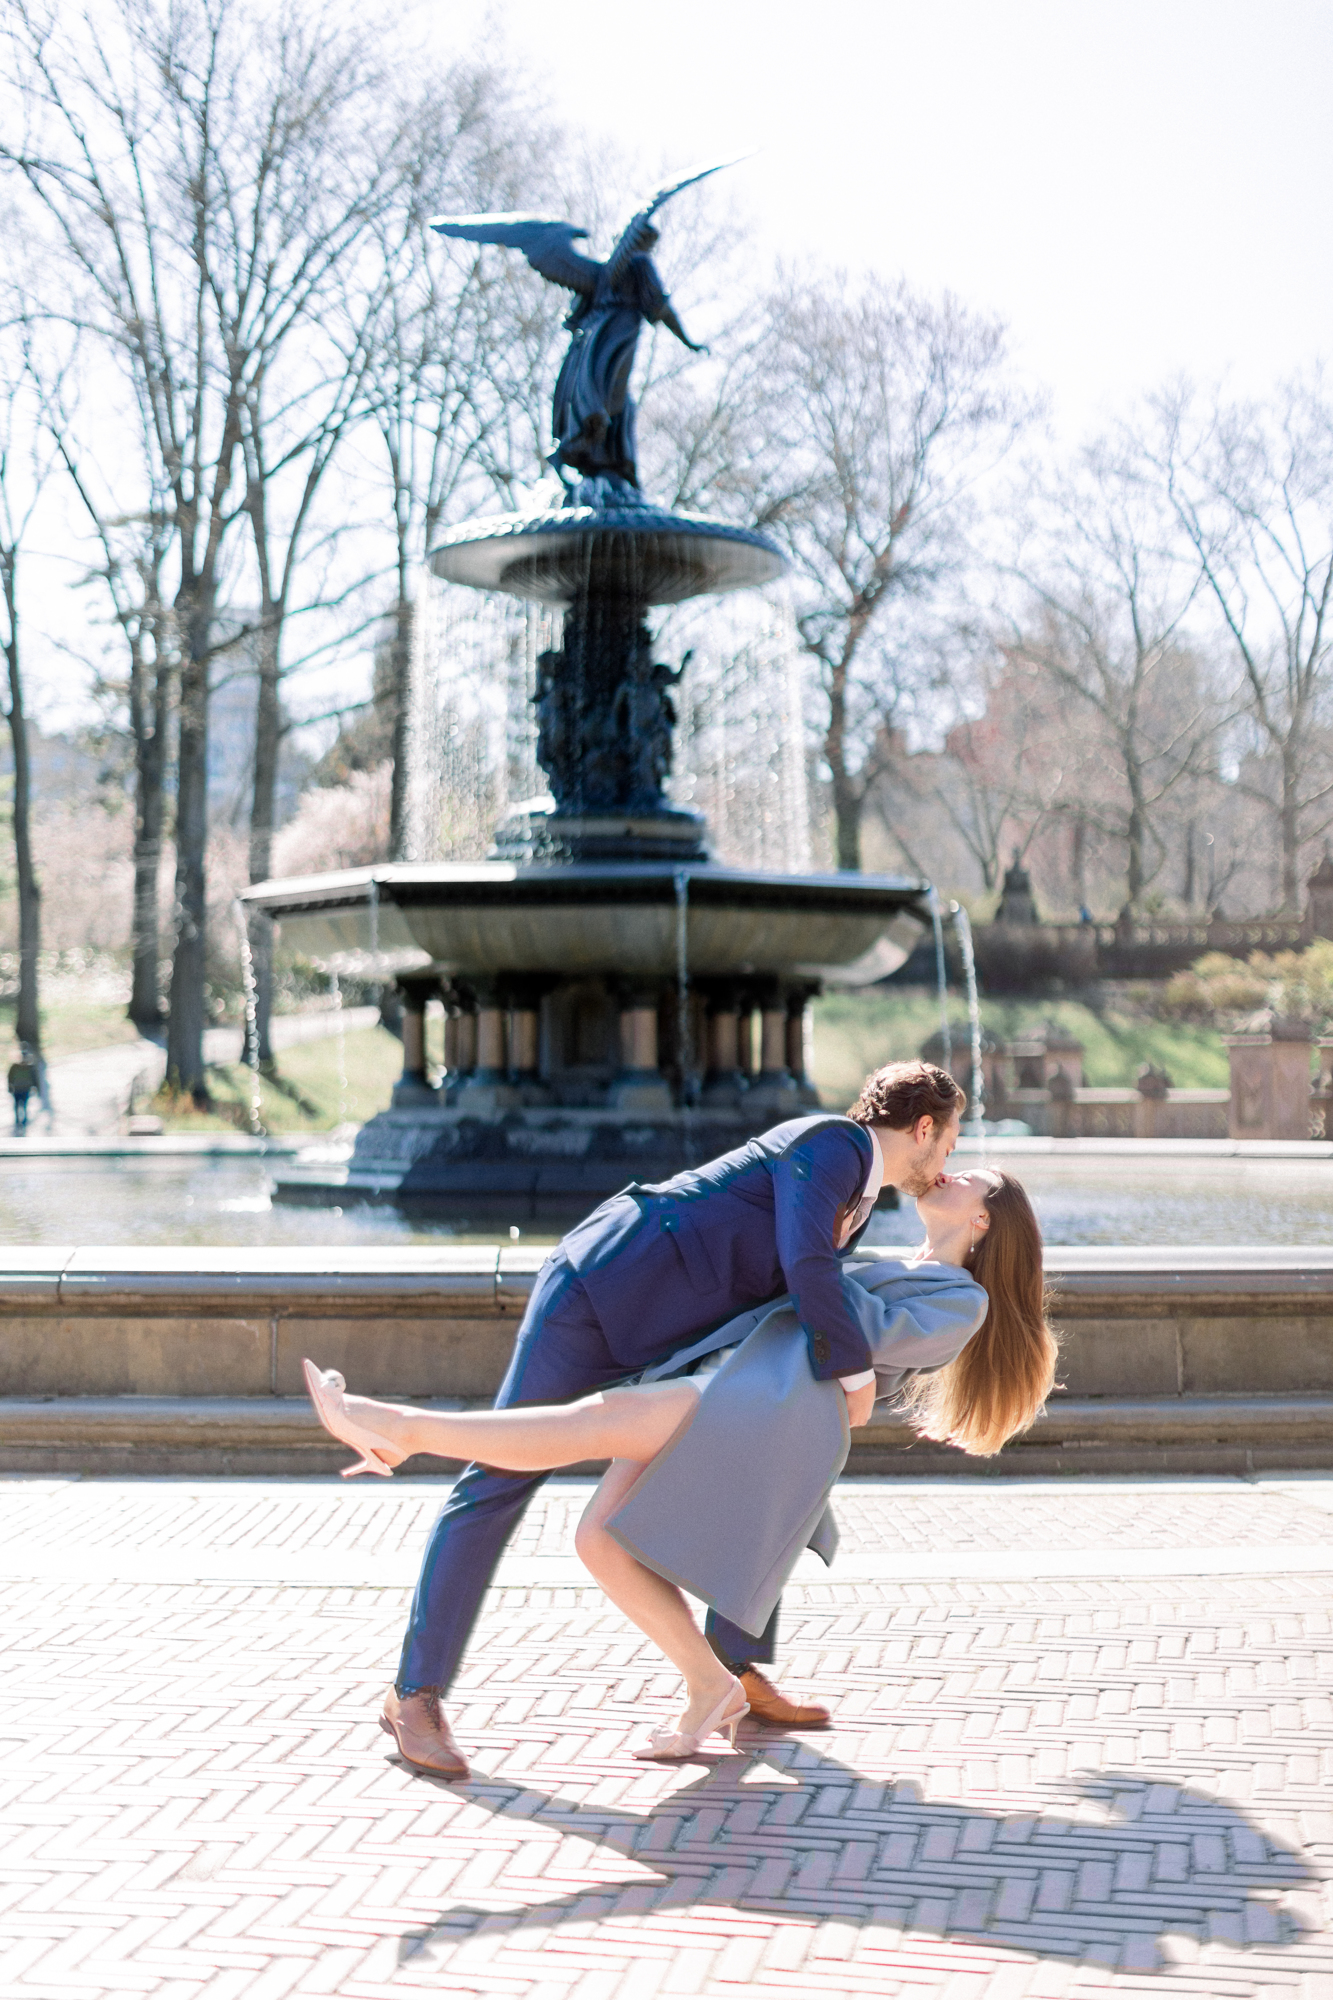 Timeless Spring Bow Bridge Wedding in Central Park Among the Cherry Blossoms